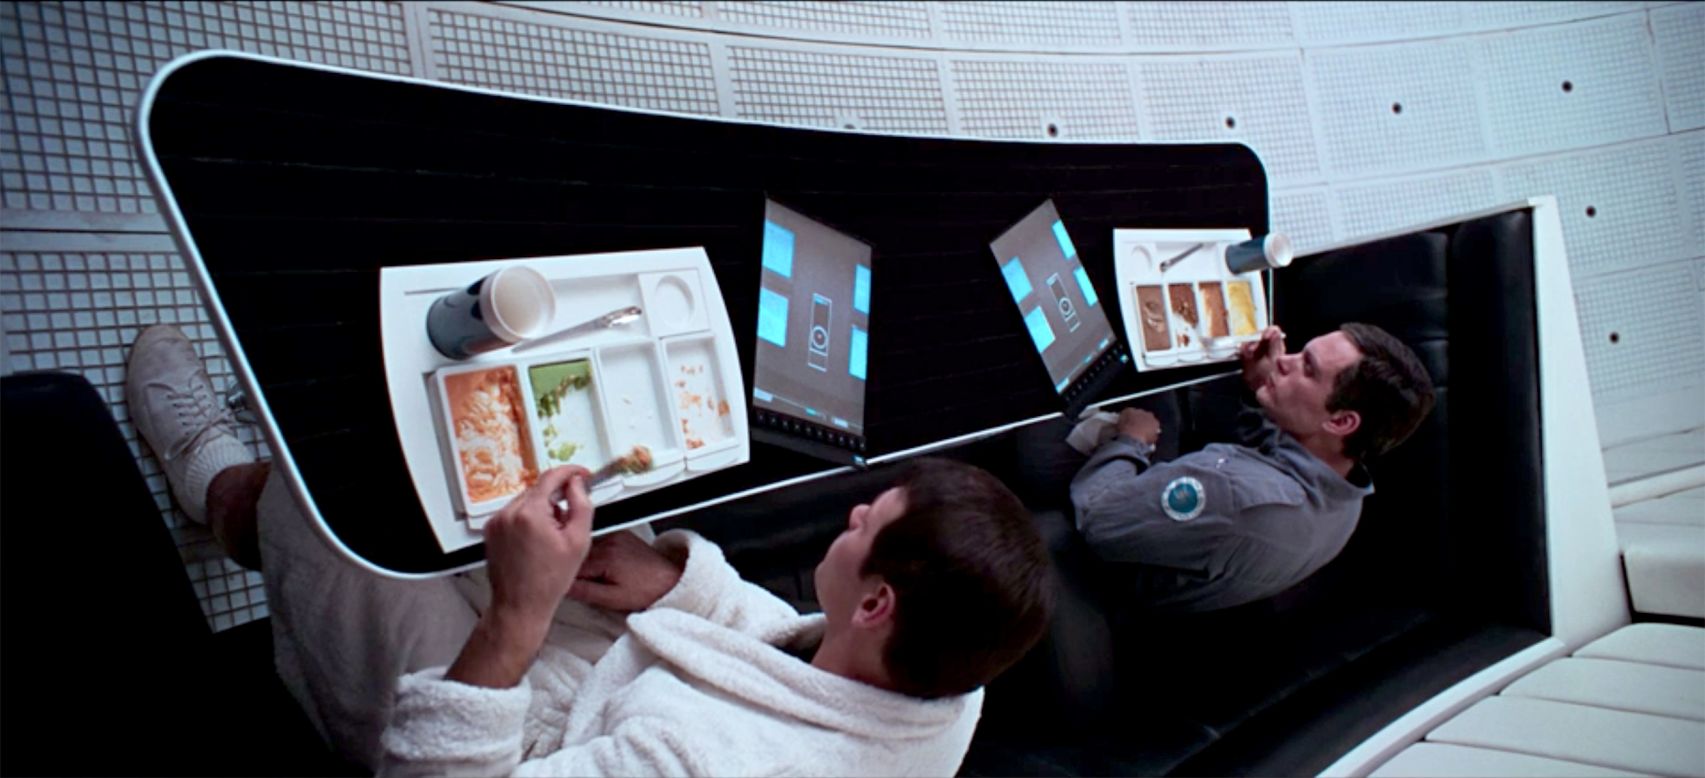 Stanley Kubrick's 1968 sci-fi film, "2001: A Space Odyssey" was loaded with advanced tech that would ultimately become reality, including smart tablets which the spaceship crew use to watch TV and films.